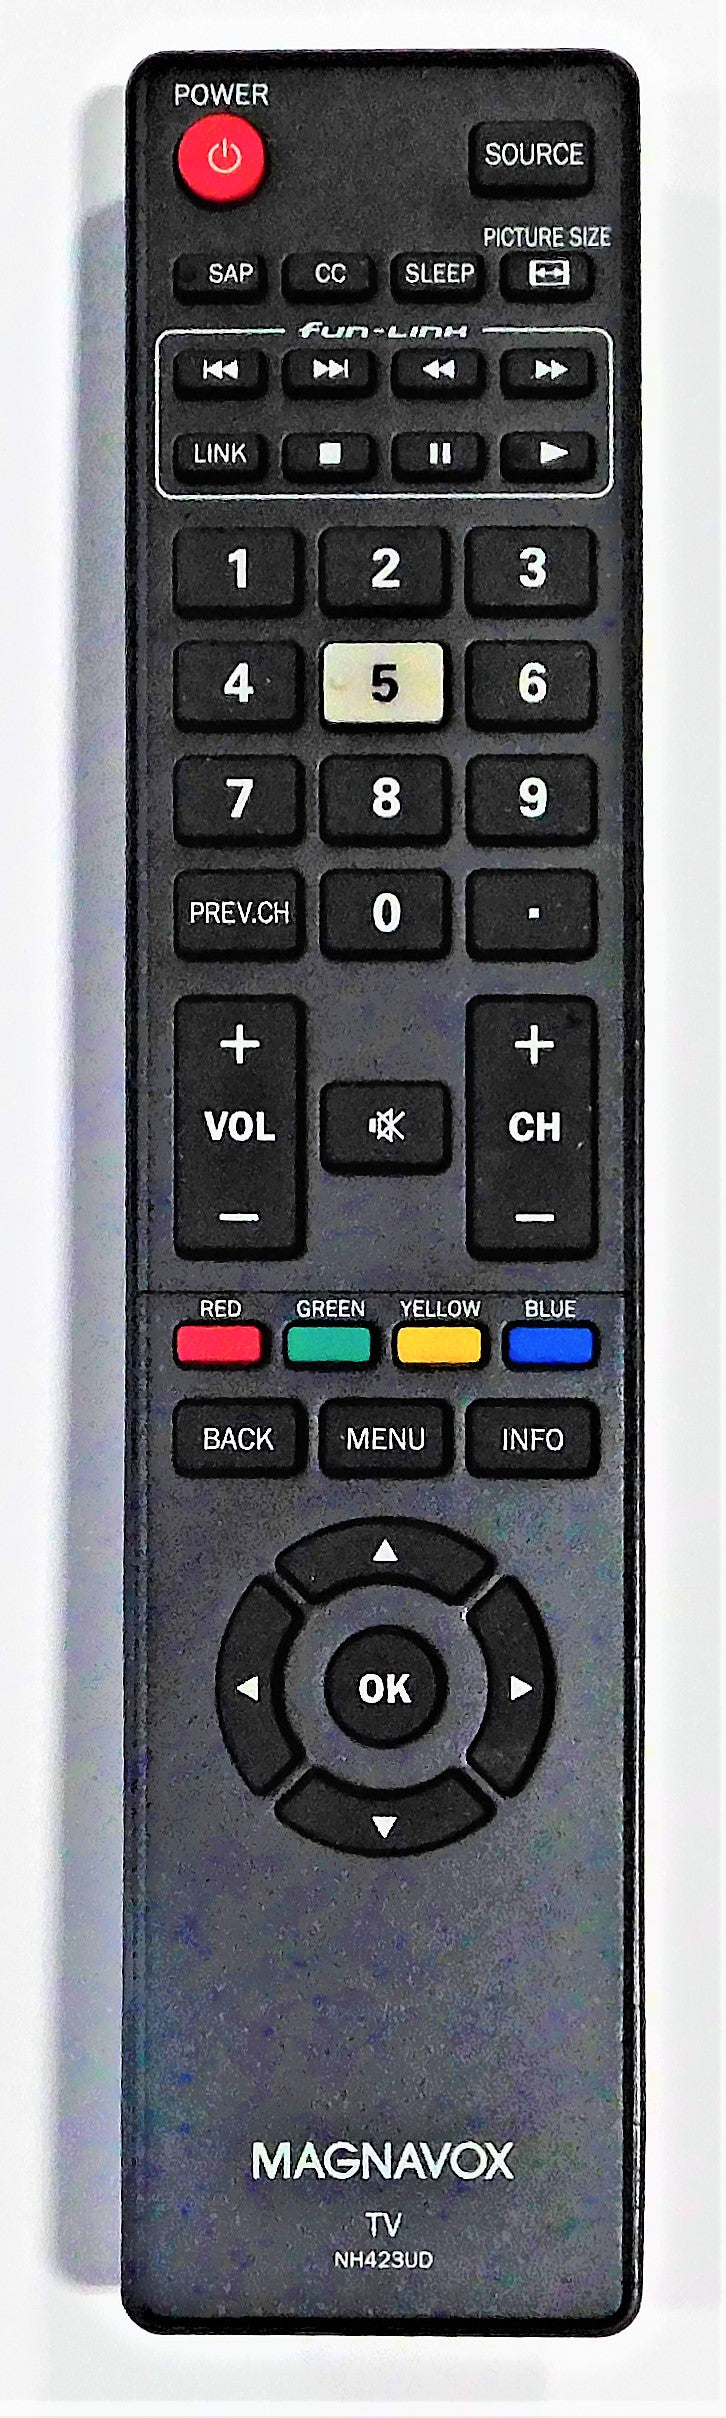 Original OEM replacement remote control for Magnavox LED/LCD TV NH423UD